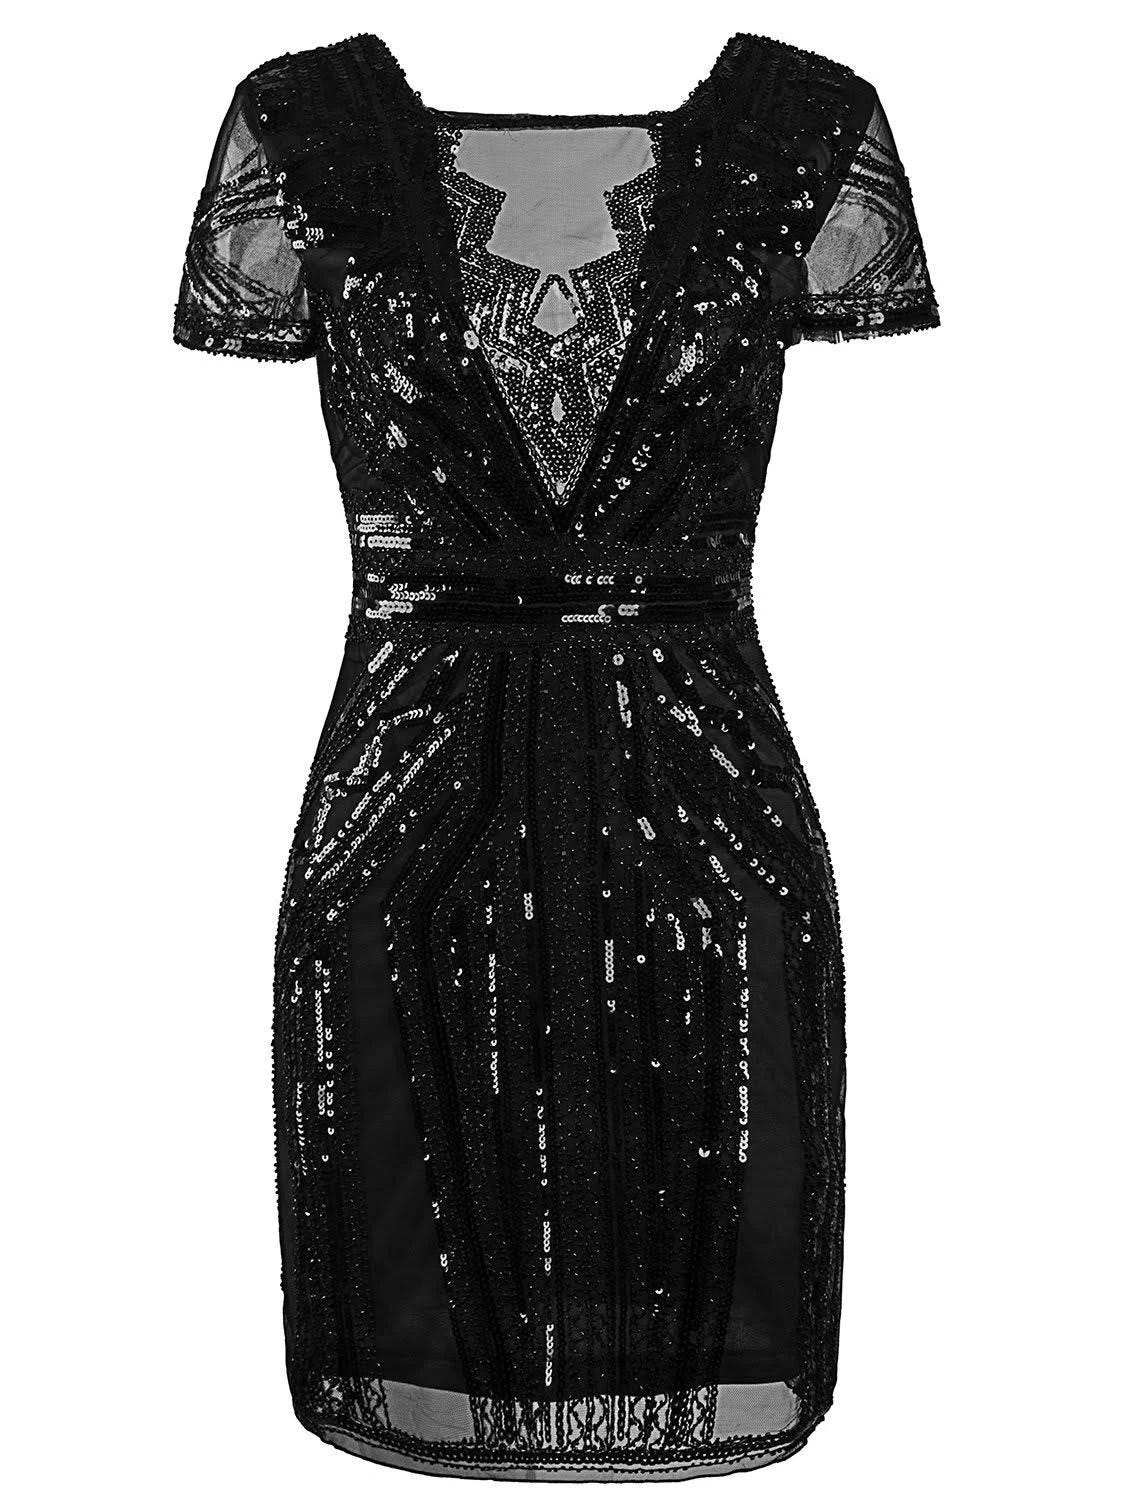 Vintage 1920s-Inspired Sequin Cocktail Gala Dress with Chic Zipper Closure | Image